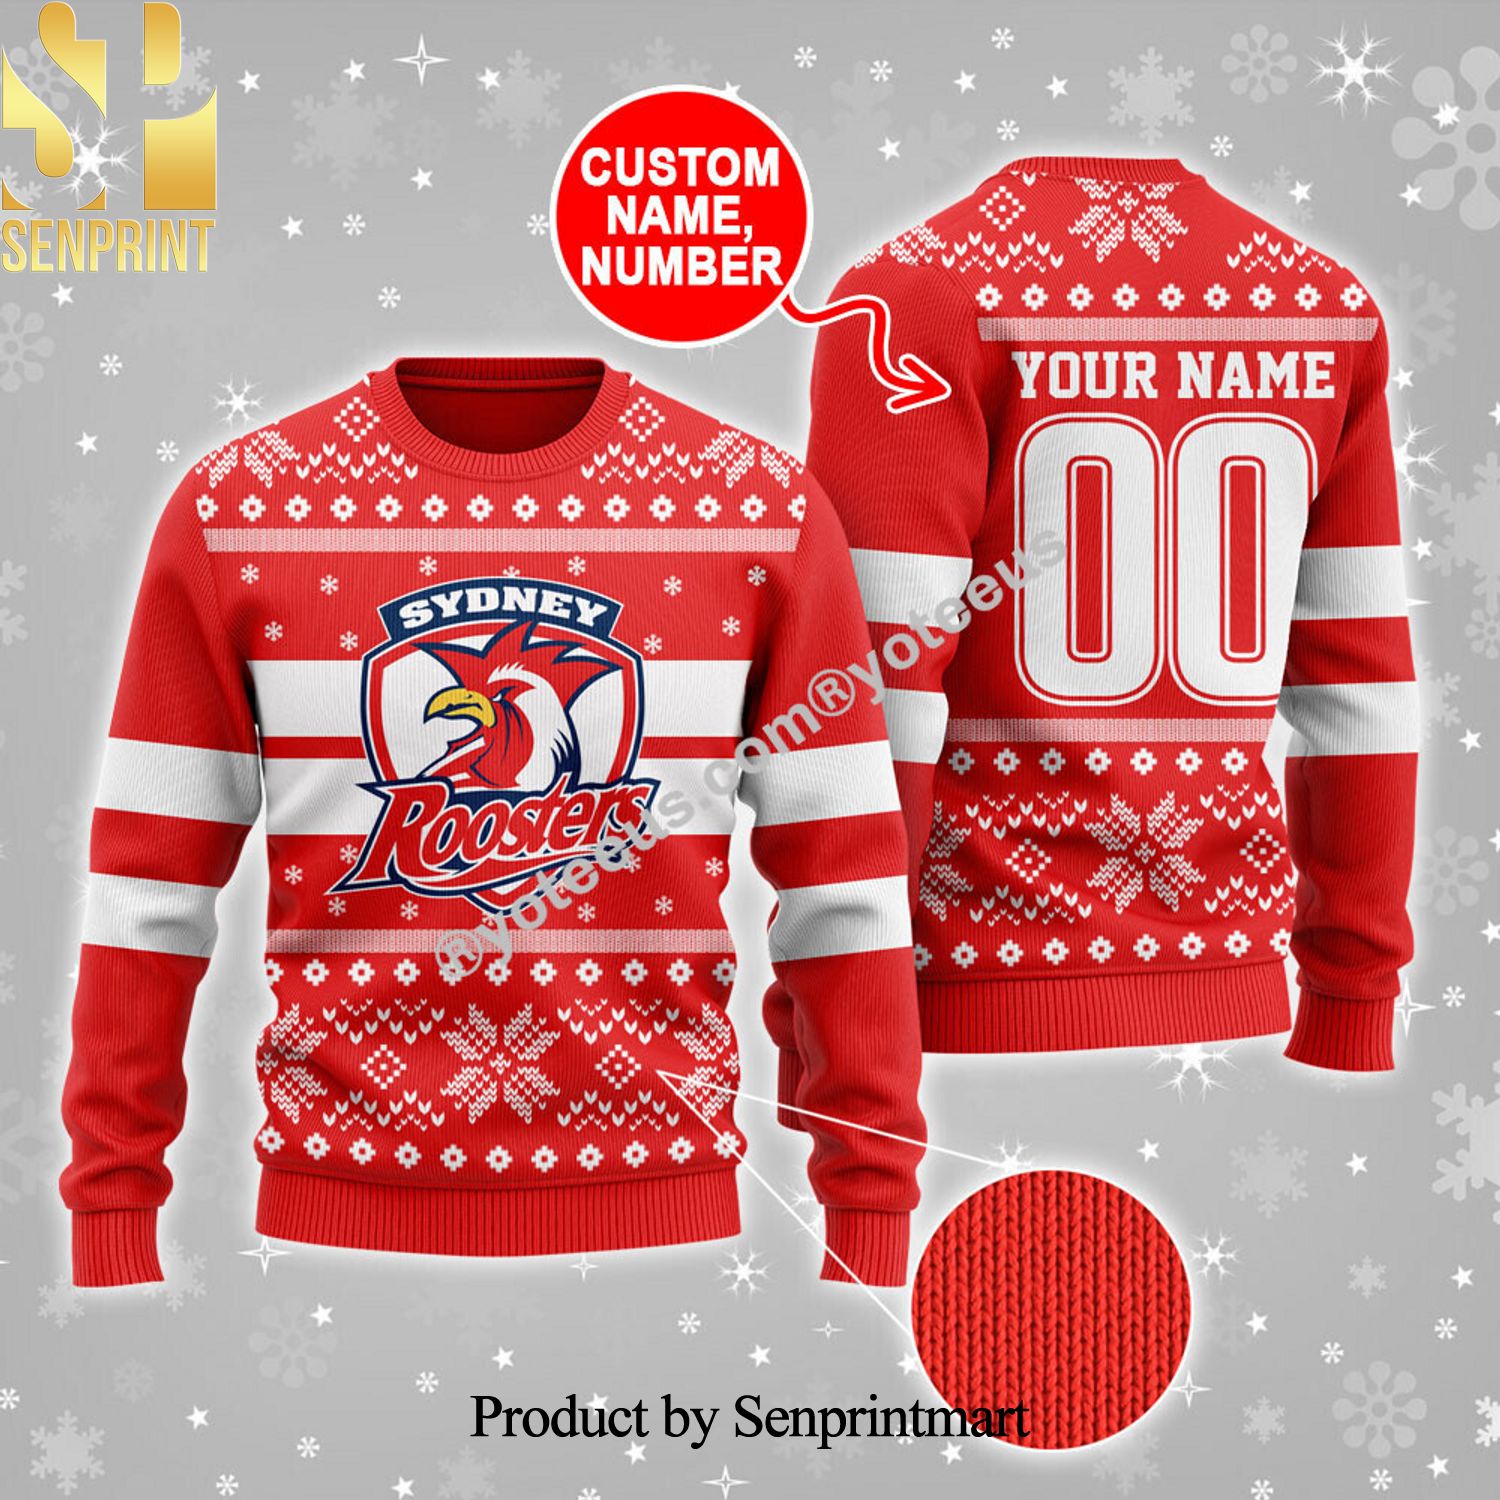 Sydney Roosters Ugly Christmas Holiday Sweater